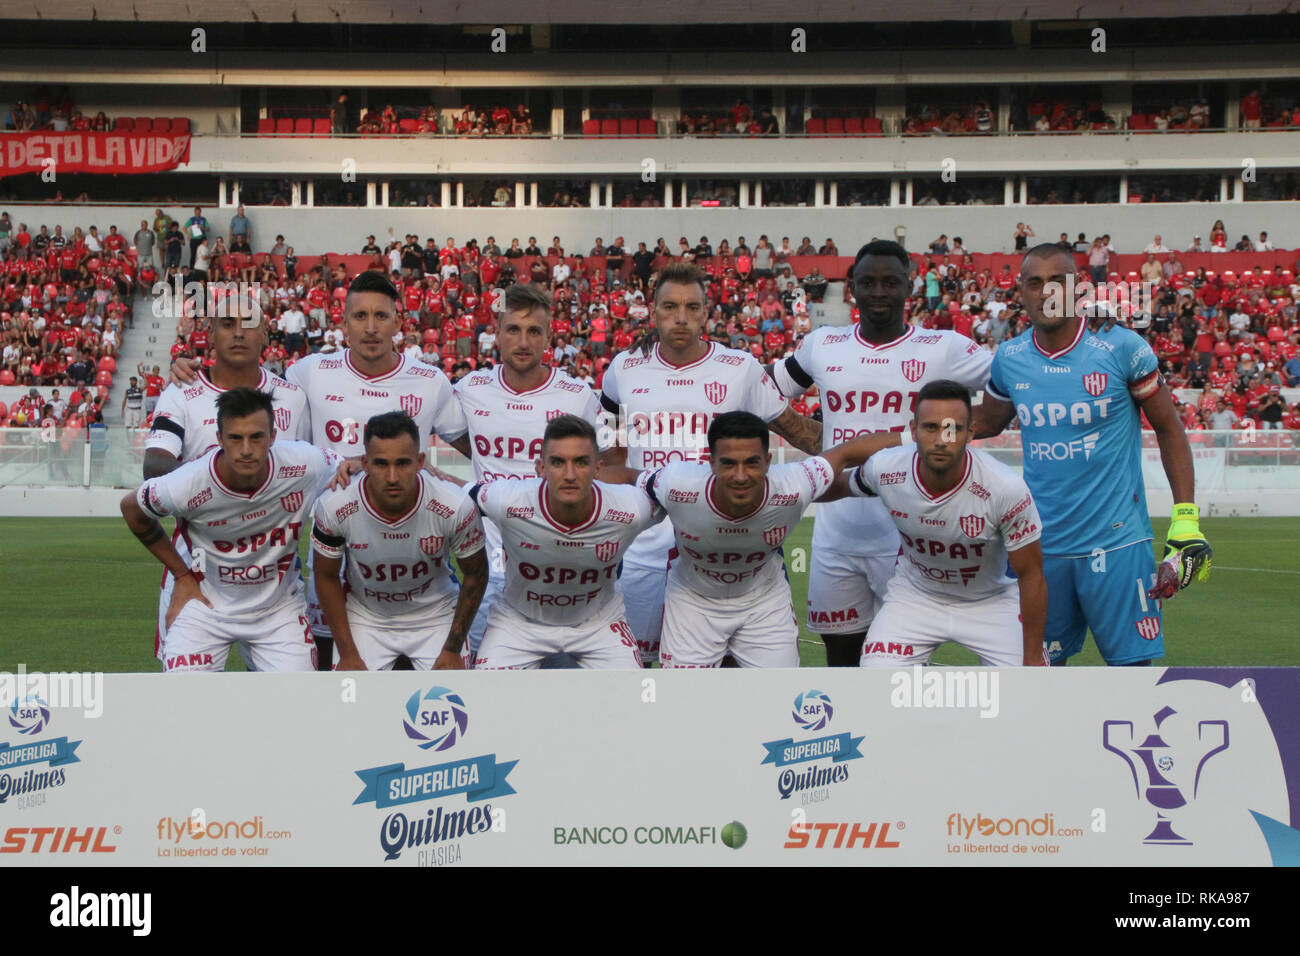 BUENOS AIRES, 09.02.2019: Team of Union before the match of Superliga Argentina between INDEPENDIENTE and UNION on Libertadores de America Stadium on Buenos Aires, Argentina. (Photo: Néstor J. Beremblum / Alamy News) Stock Photo